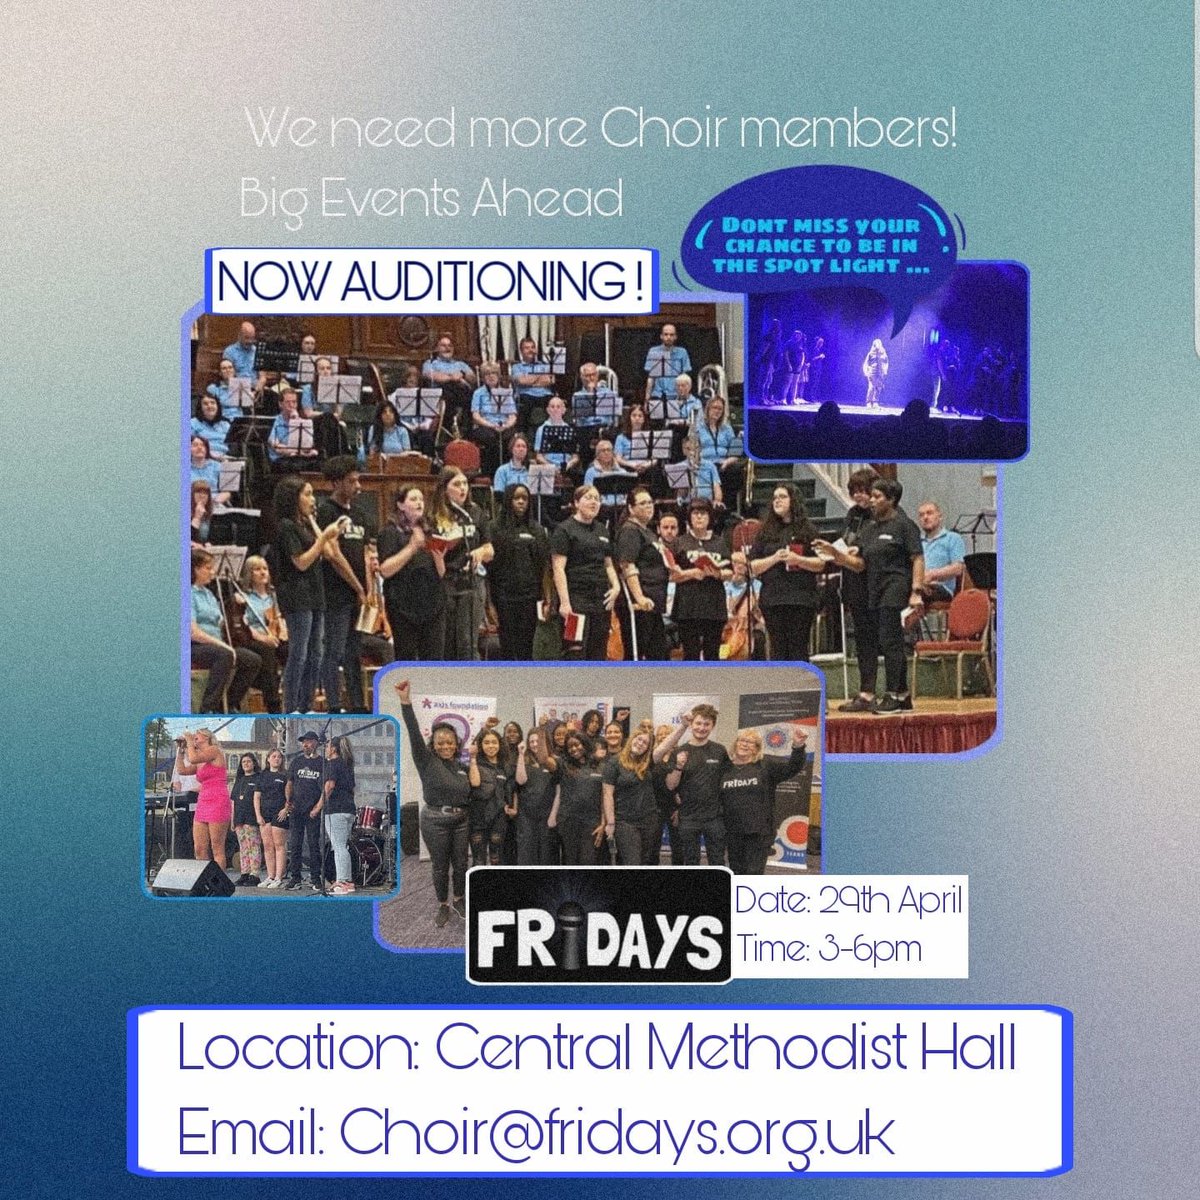 Please contact us on email or social media to join our Fridays Choir!! Also email for any details 📧 fridayscoventryknife@gmail.com

#fridayschoir #fridayscoventry #fridayscov #coventry #coventrymusic #music #choir #choirchoirchoir #fyp